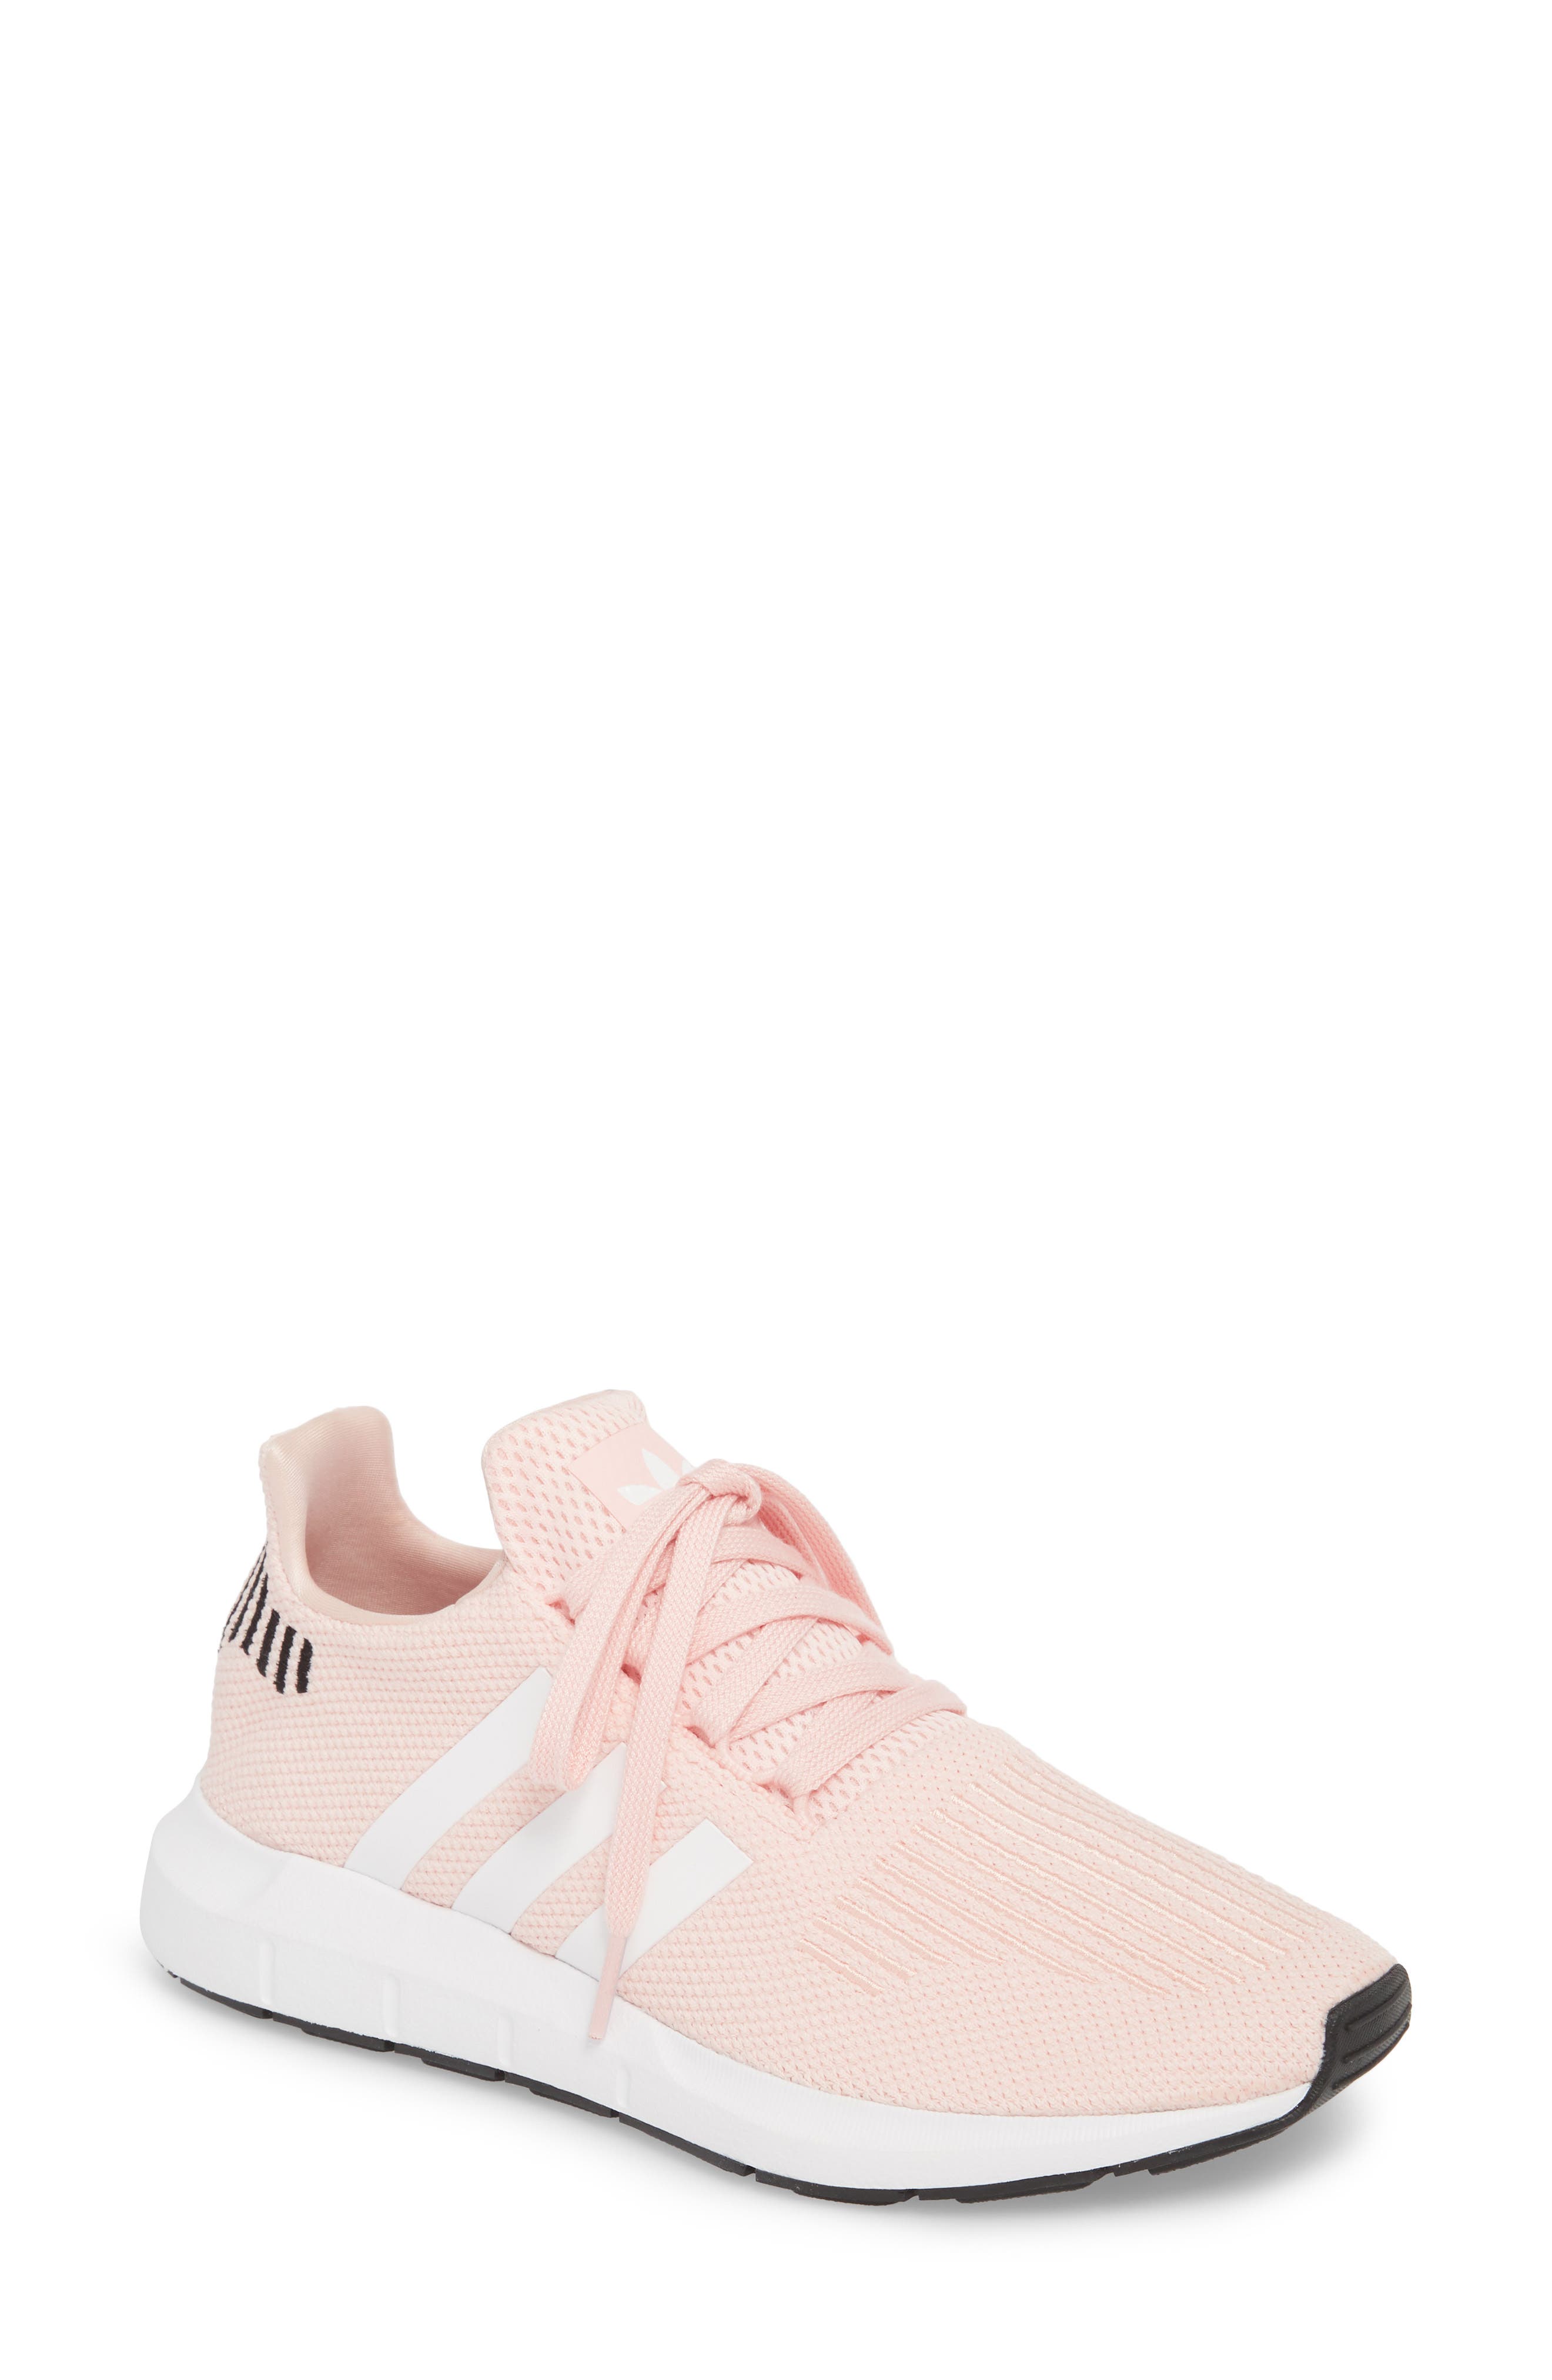 blush pink sneakers womens